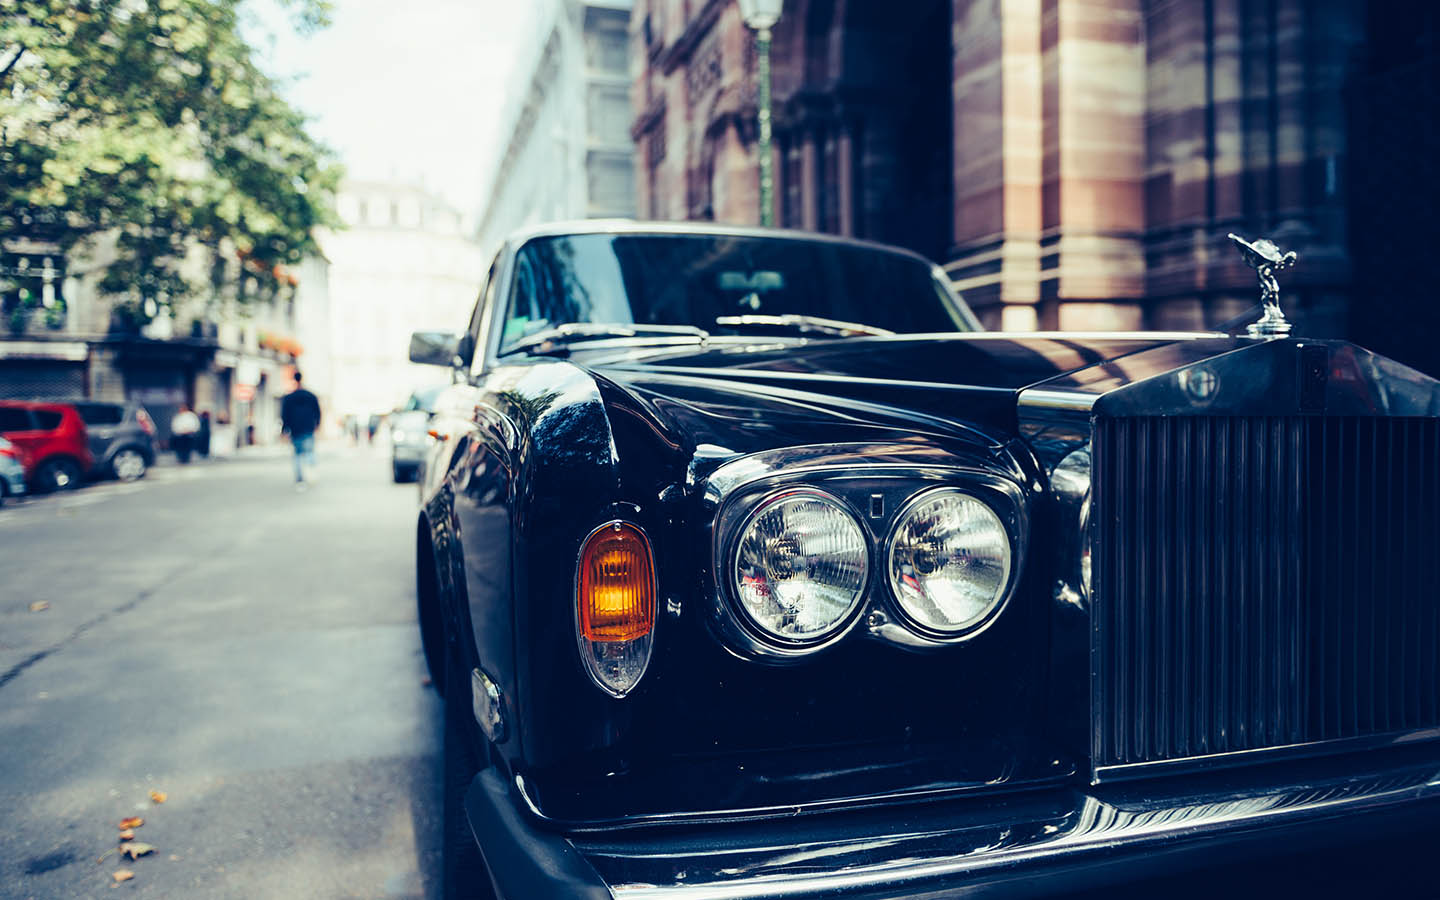 buy any of the top rolls royce models and have a luxury vehicle driving experience